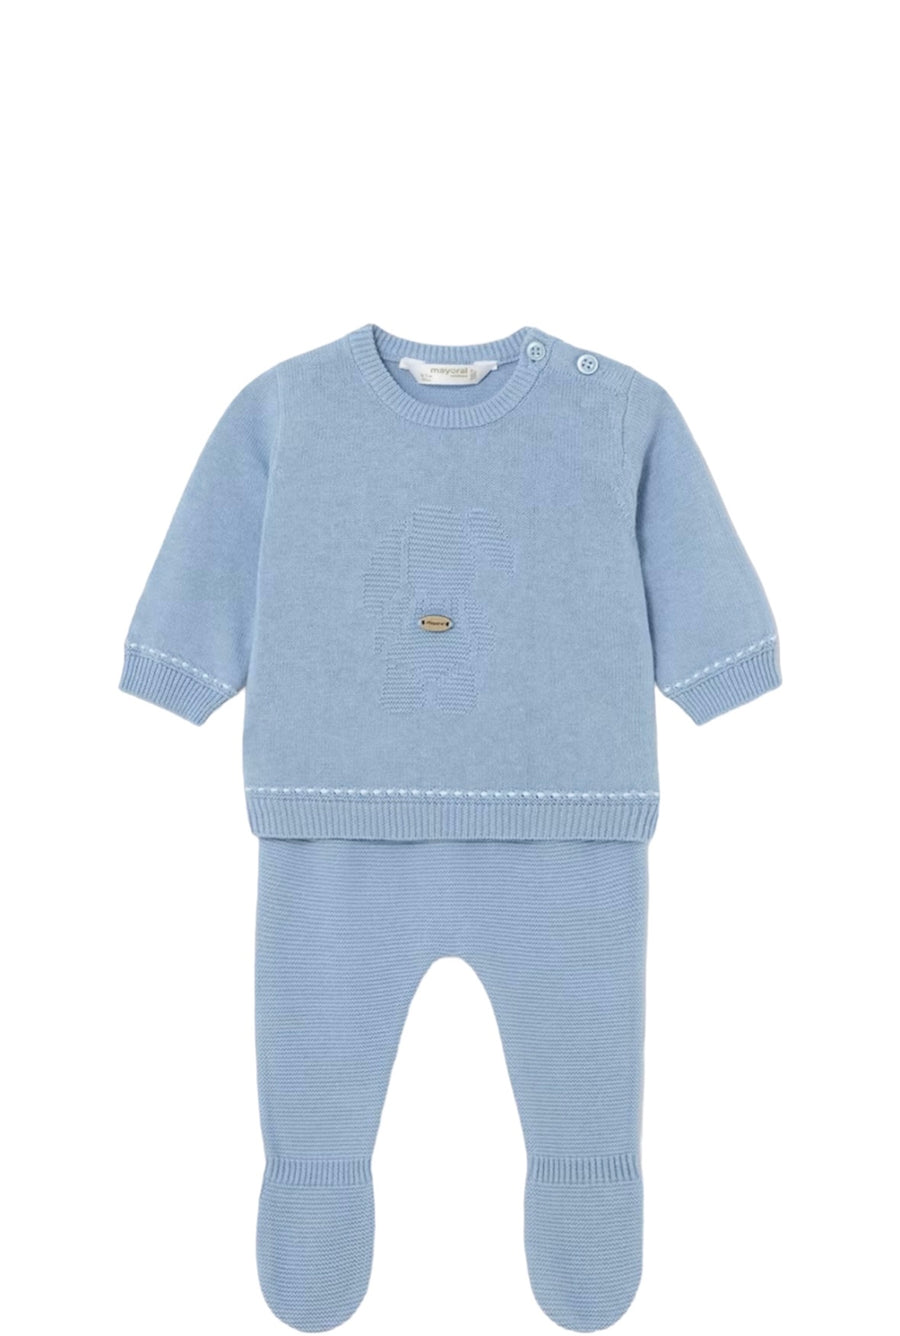 2 PIECE BABY BOY KNIT BLUE OUTFIT - Pink and Brown Boutique